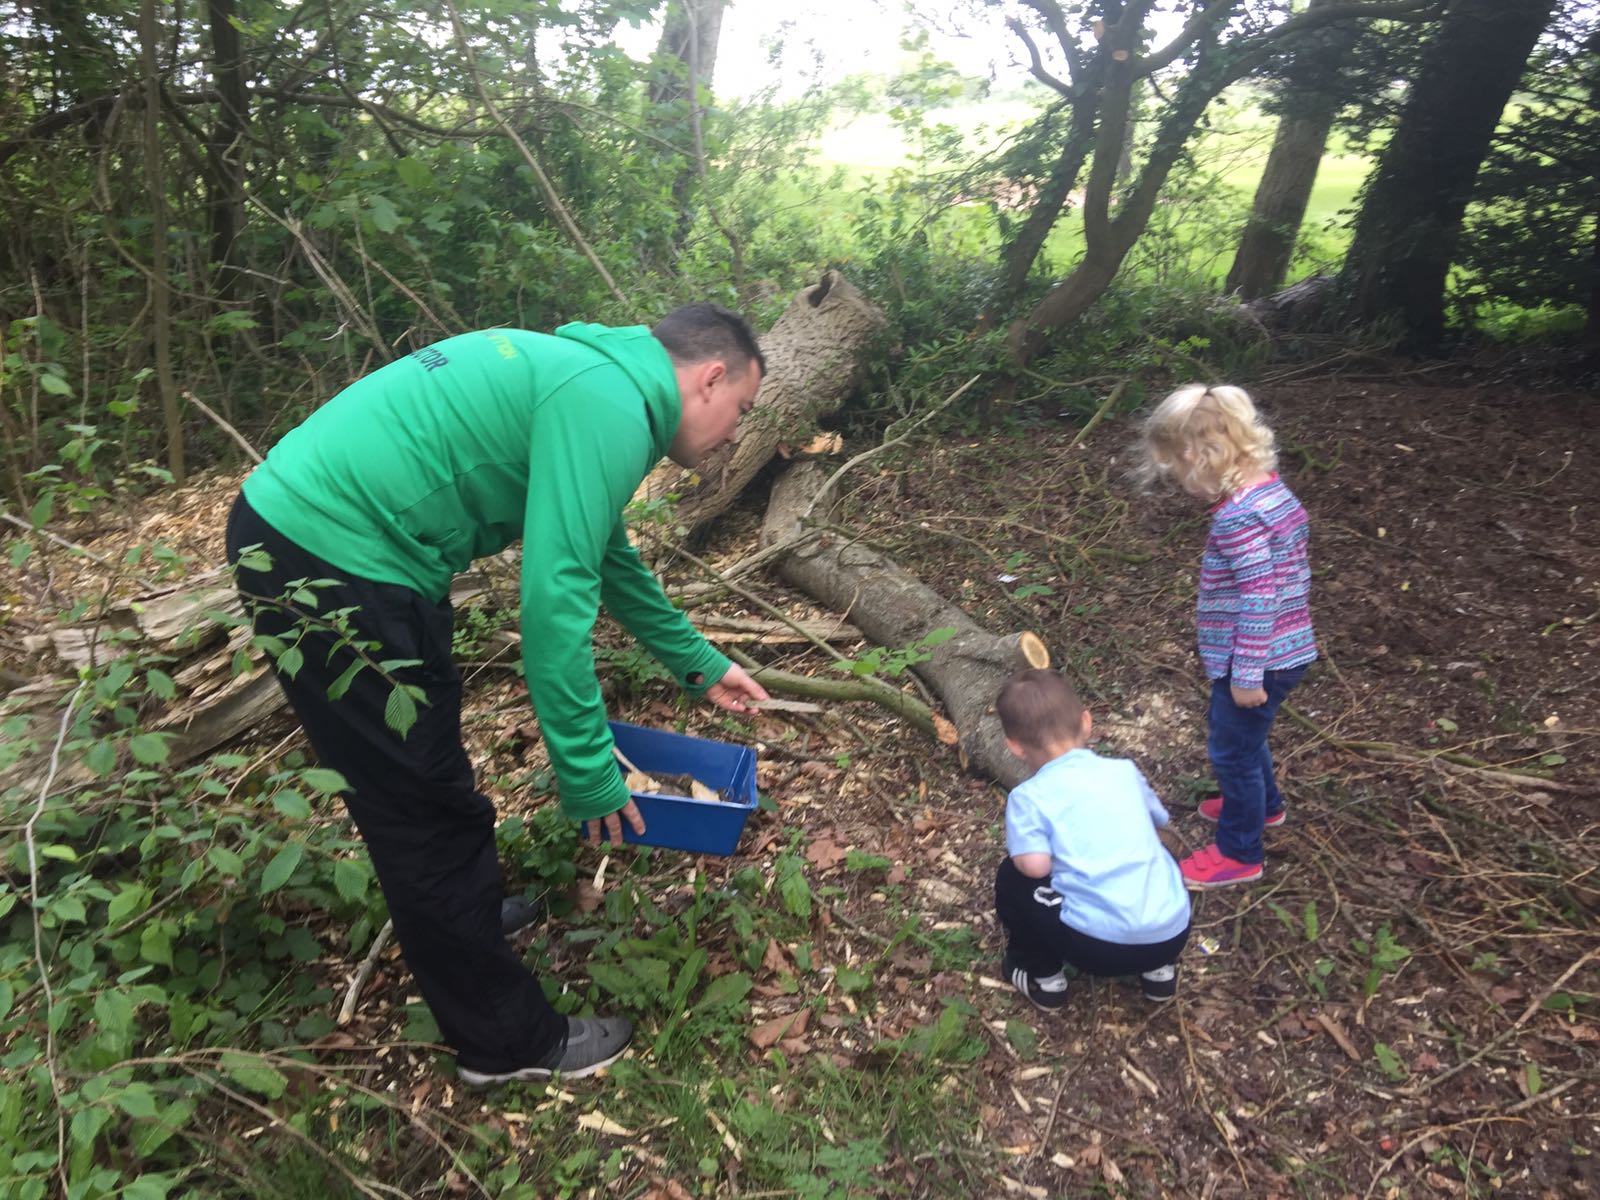 An instructor and two children bug hunting